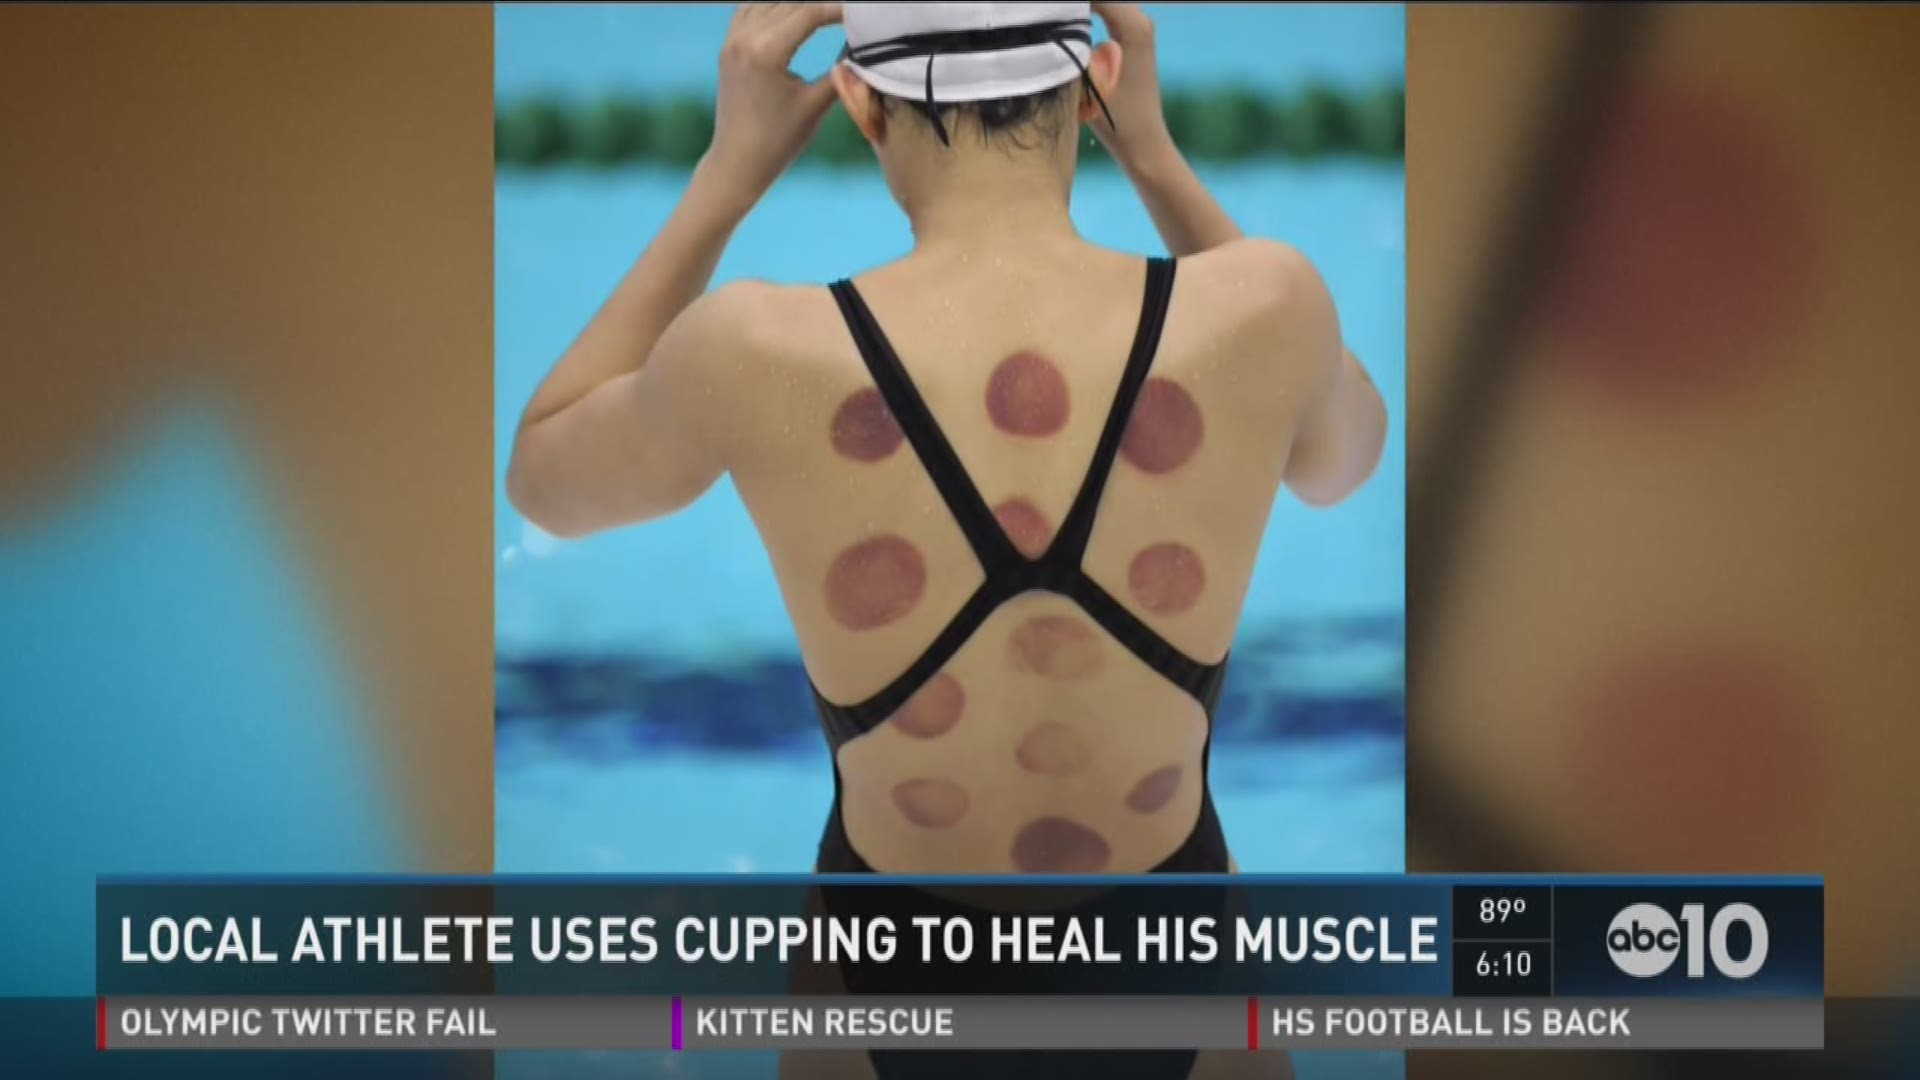 If you watched the Olympic Games over the weekend, you may have noticed some of the athletes, including Michael Phelps, had circular bruises on their bodies and it may have freaked out out a little. Aug. 8, 2016